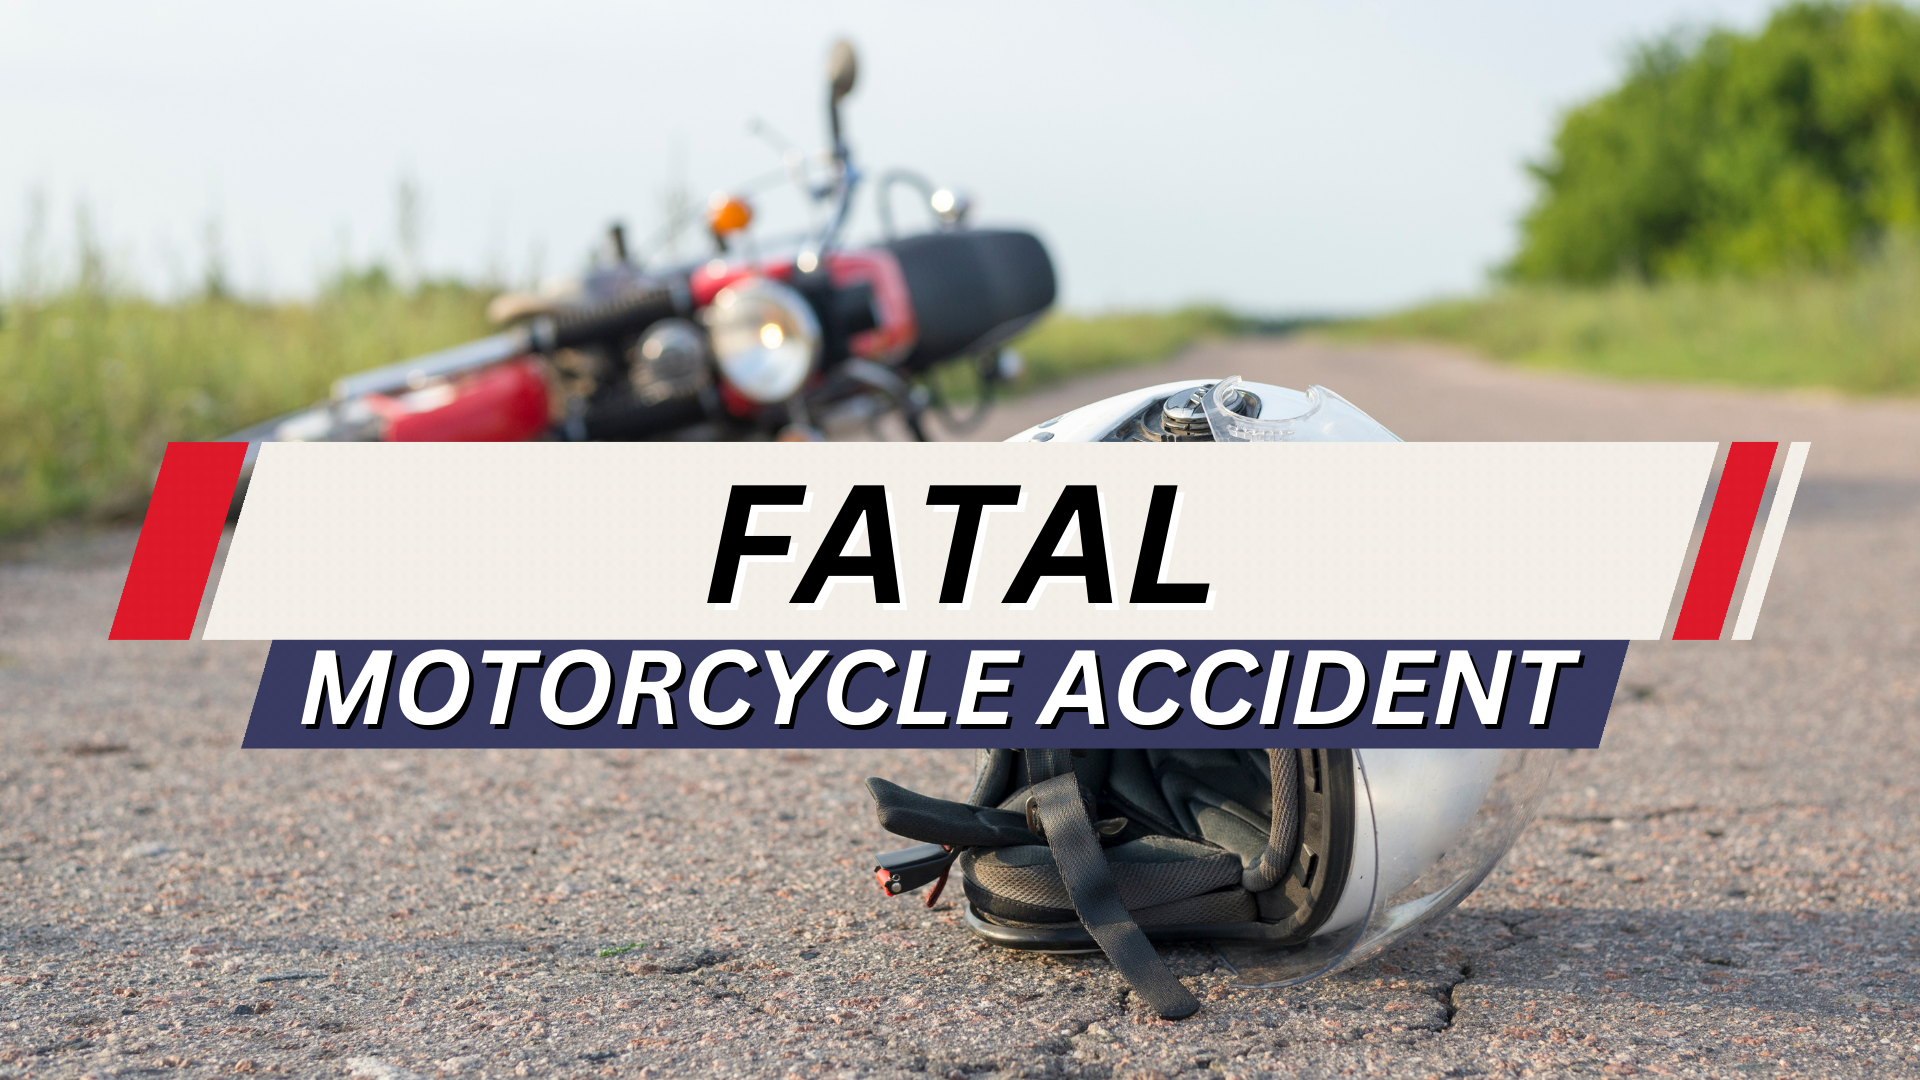 Jefferson County Motorcycle Fatality